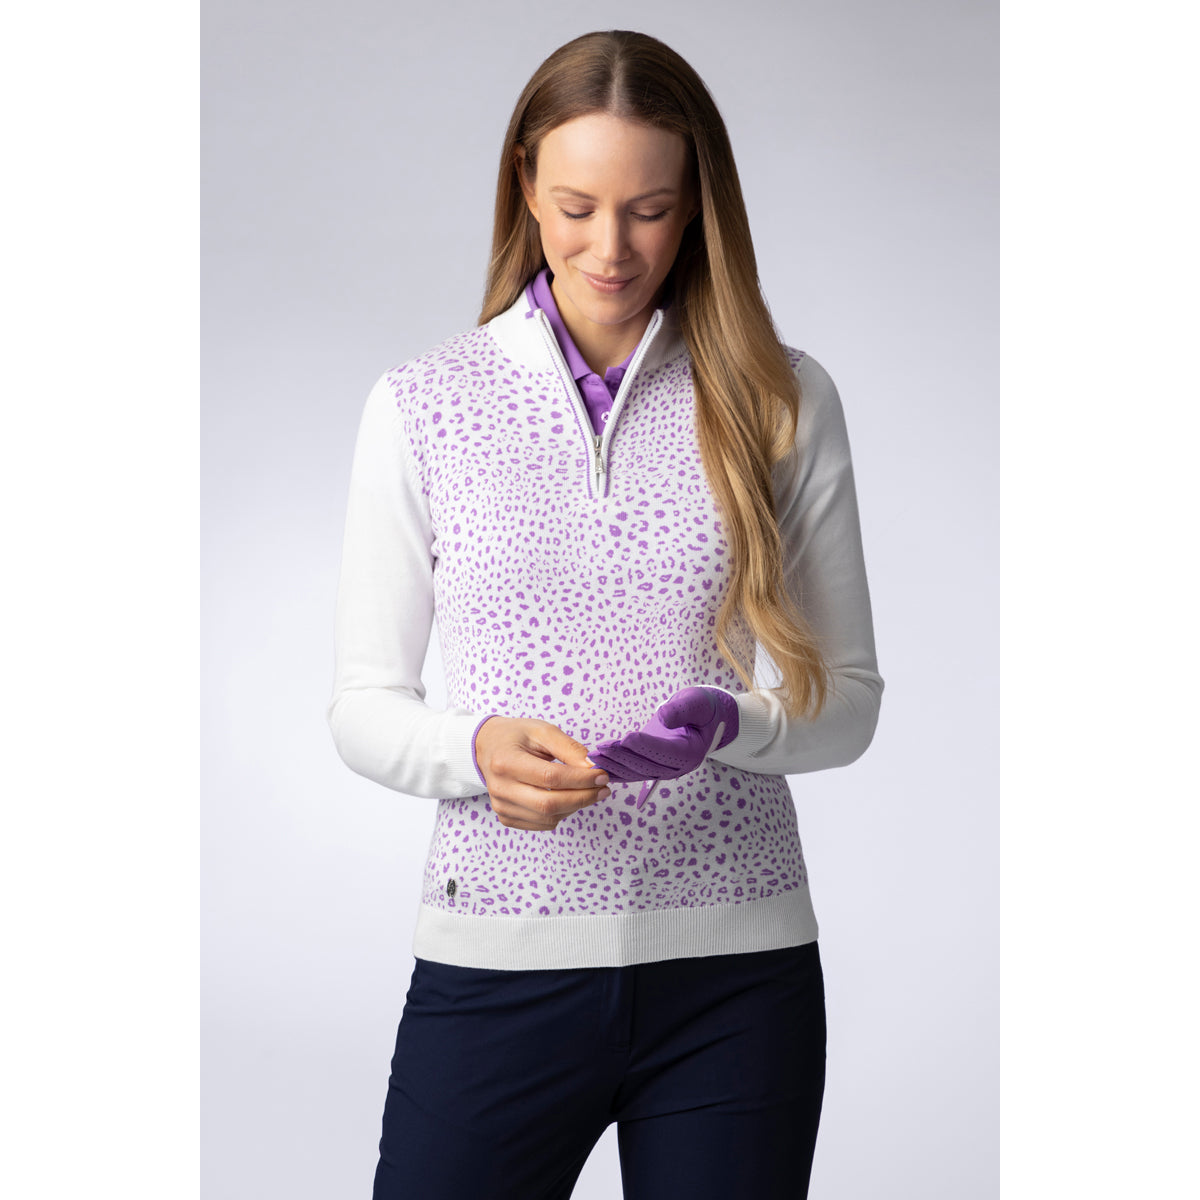 Glenmuir Ladies Long Sleeve Cotton Sweater with Animal Print Detail in White/Amethyst